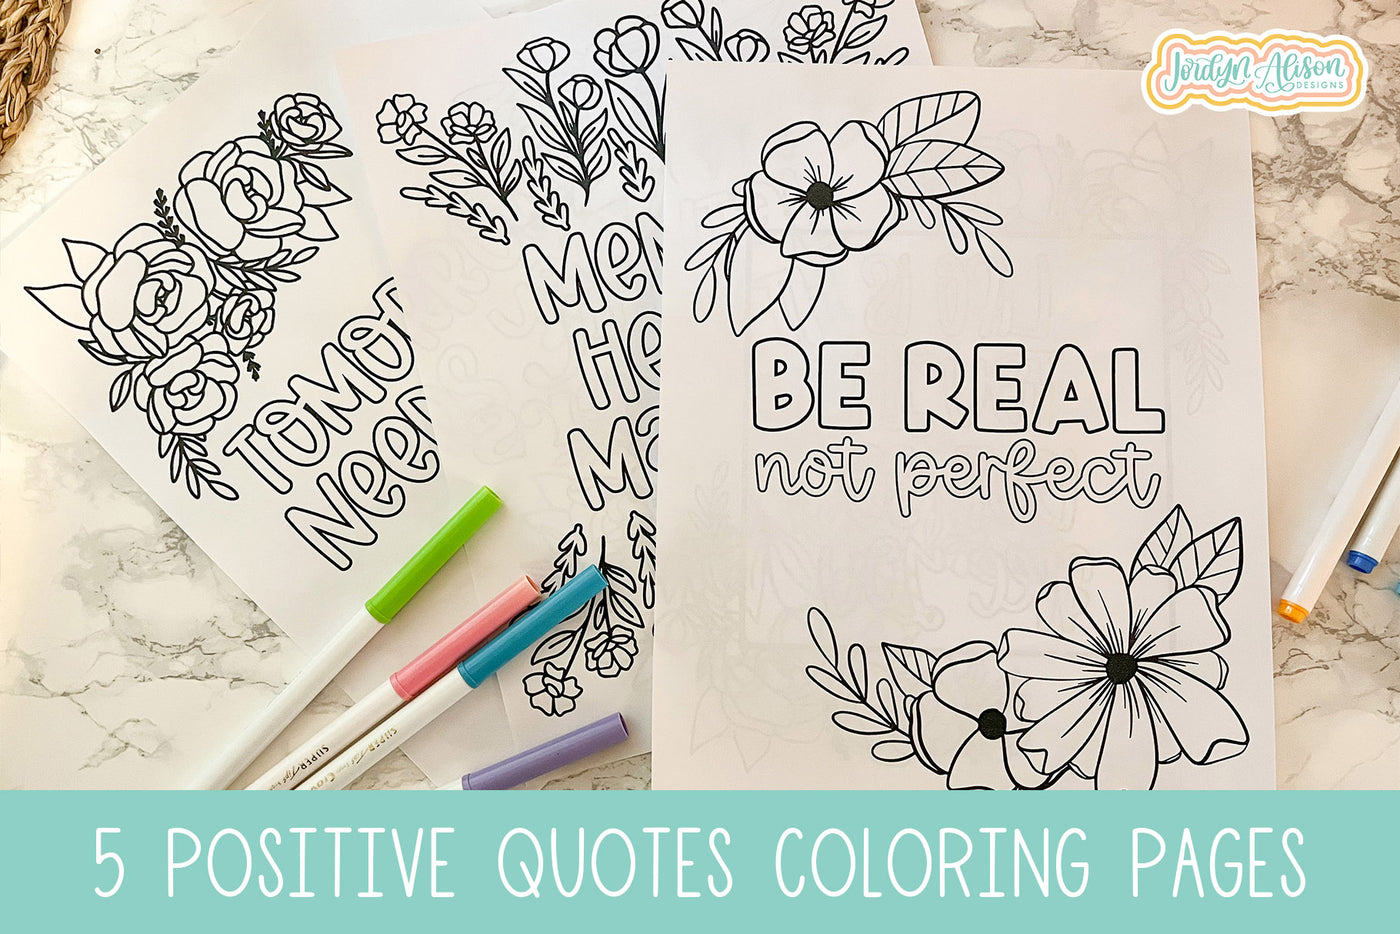 Positive Quotes Coloring Pages